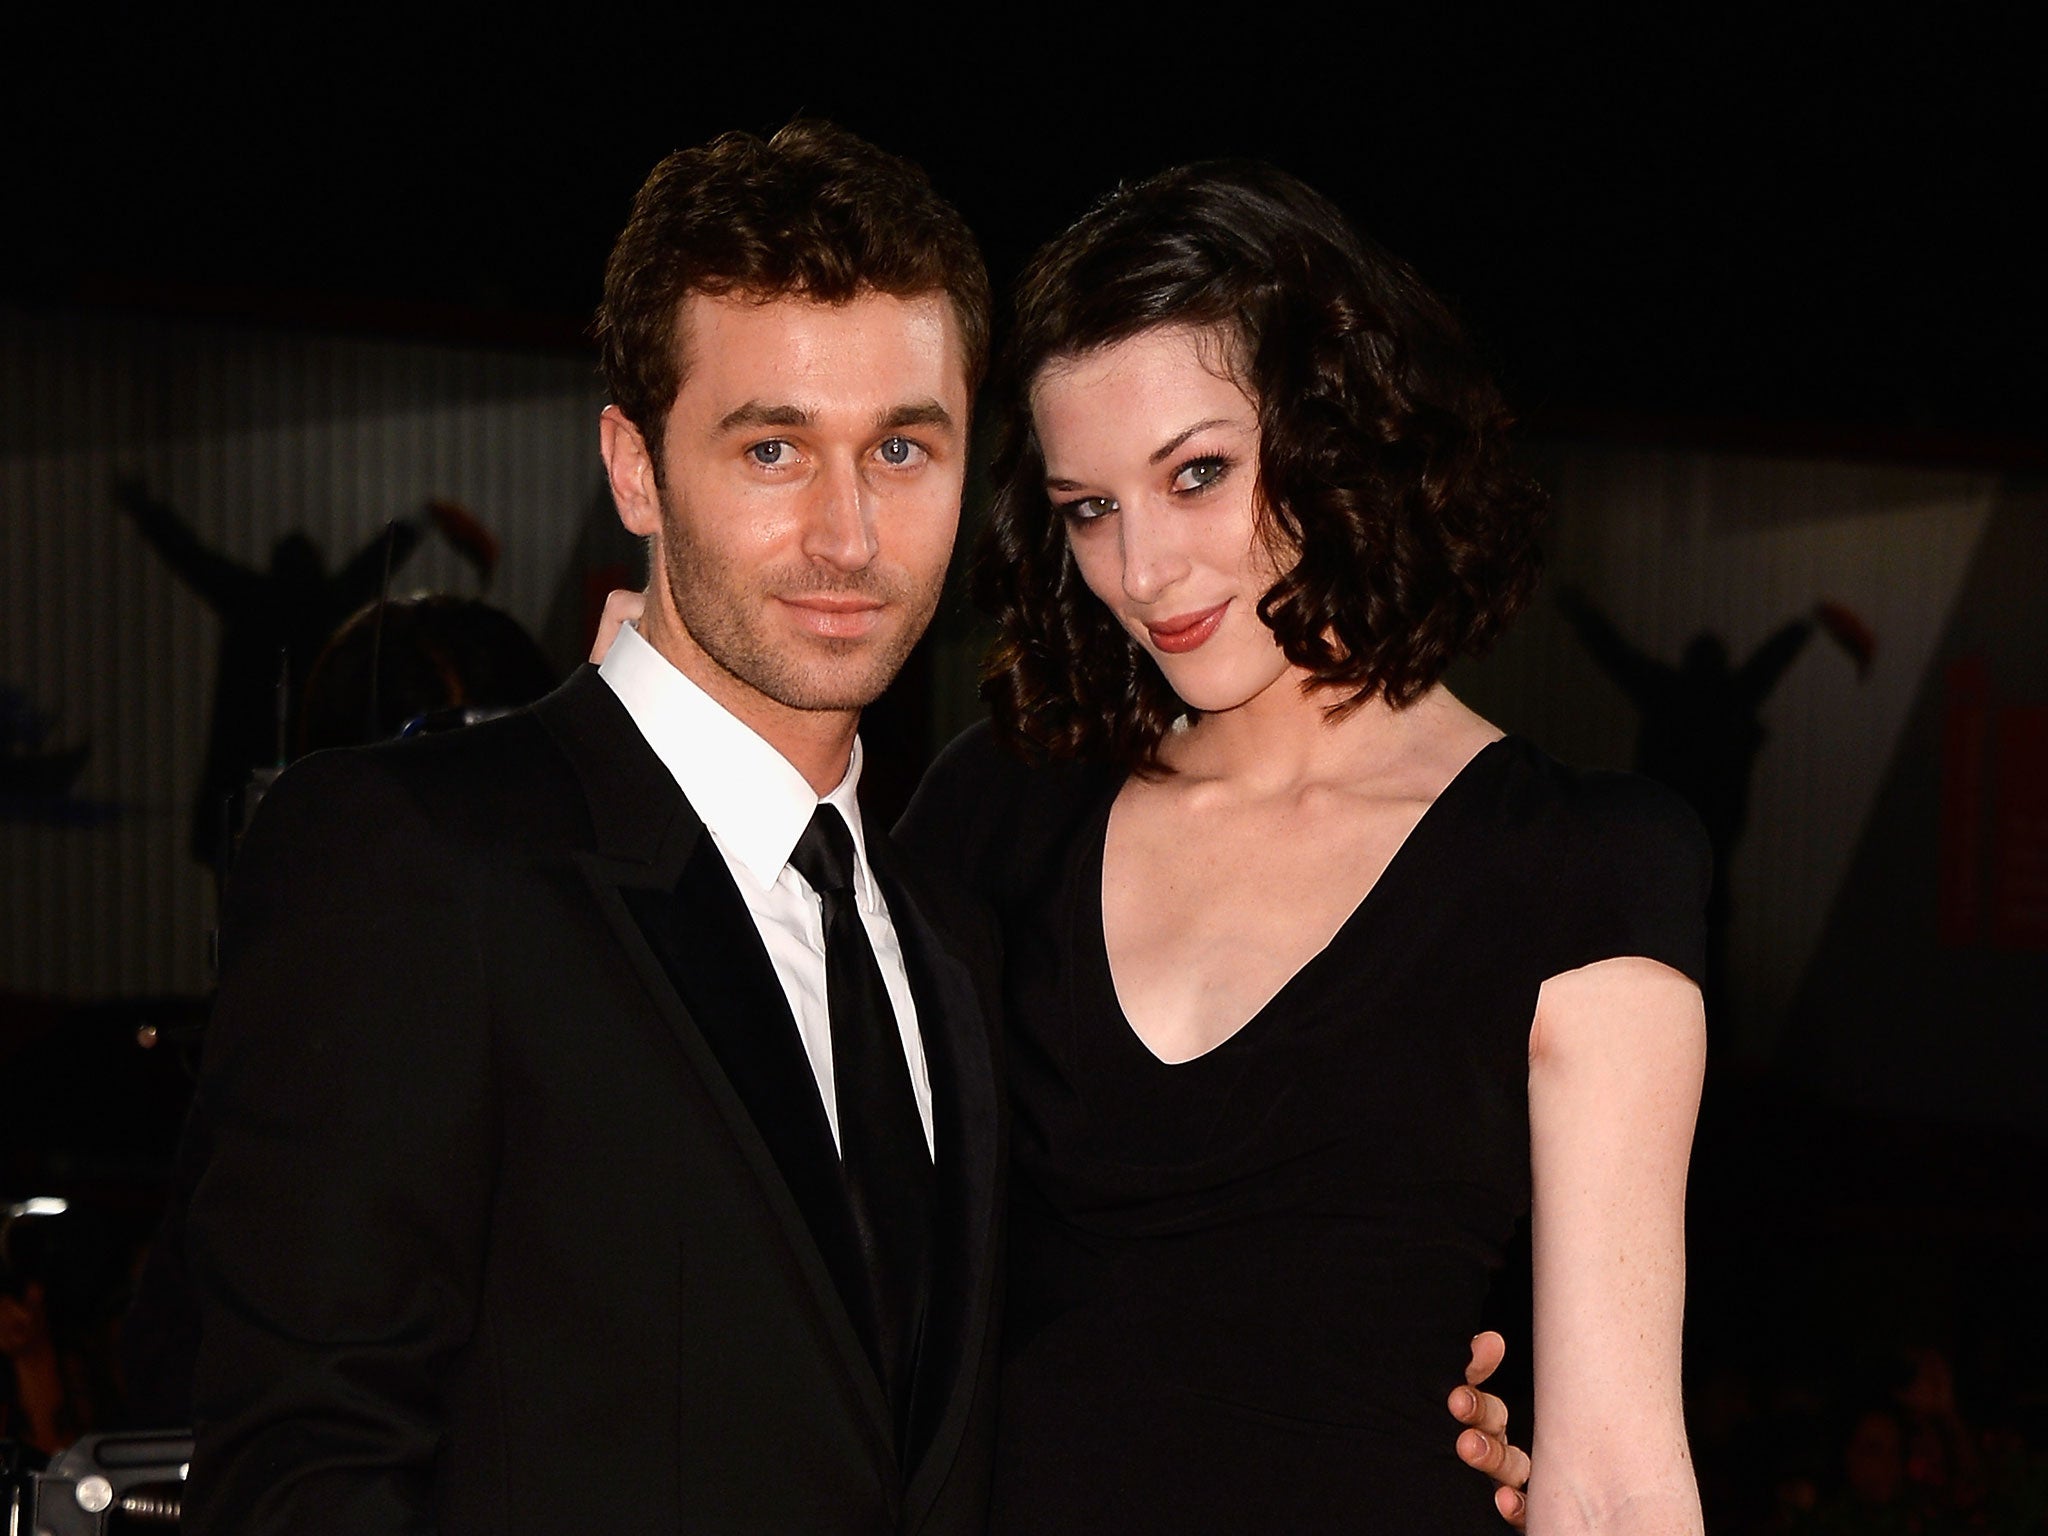 James Deen dropped by adult film companies after allegations of rape and sexual assault The Independent The Independent